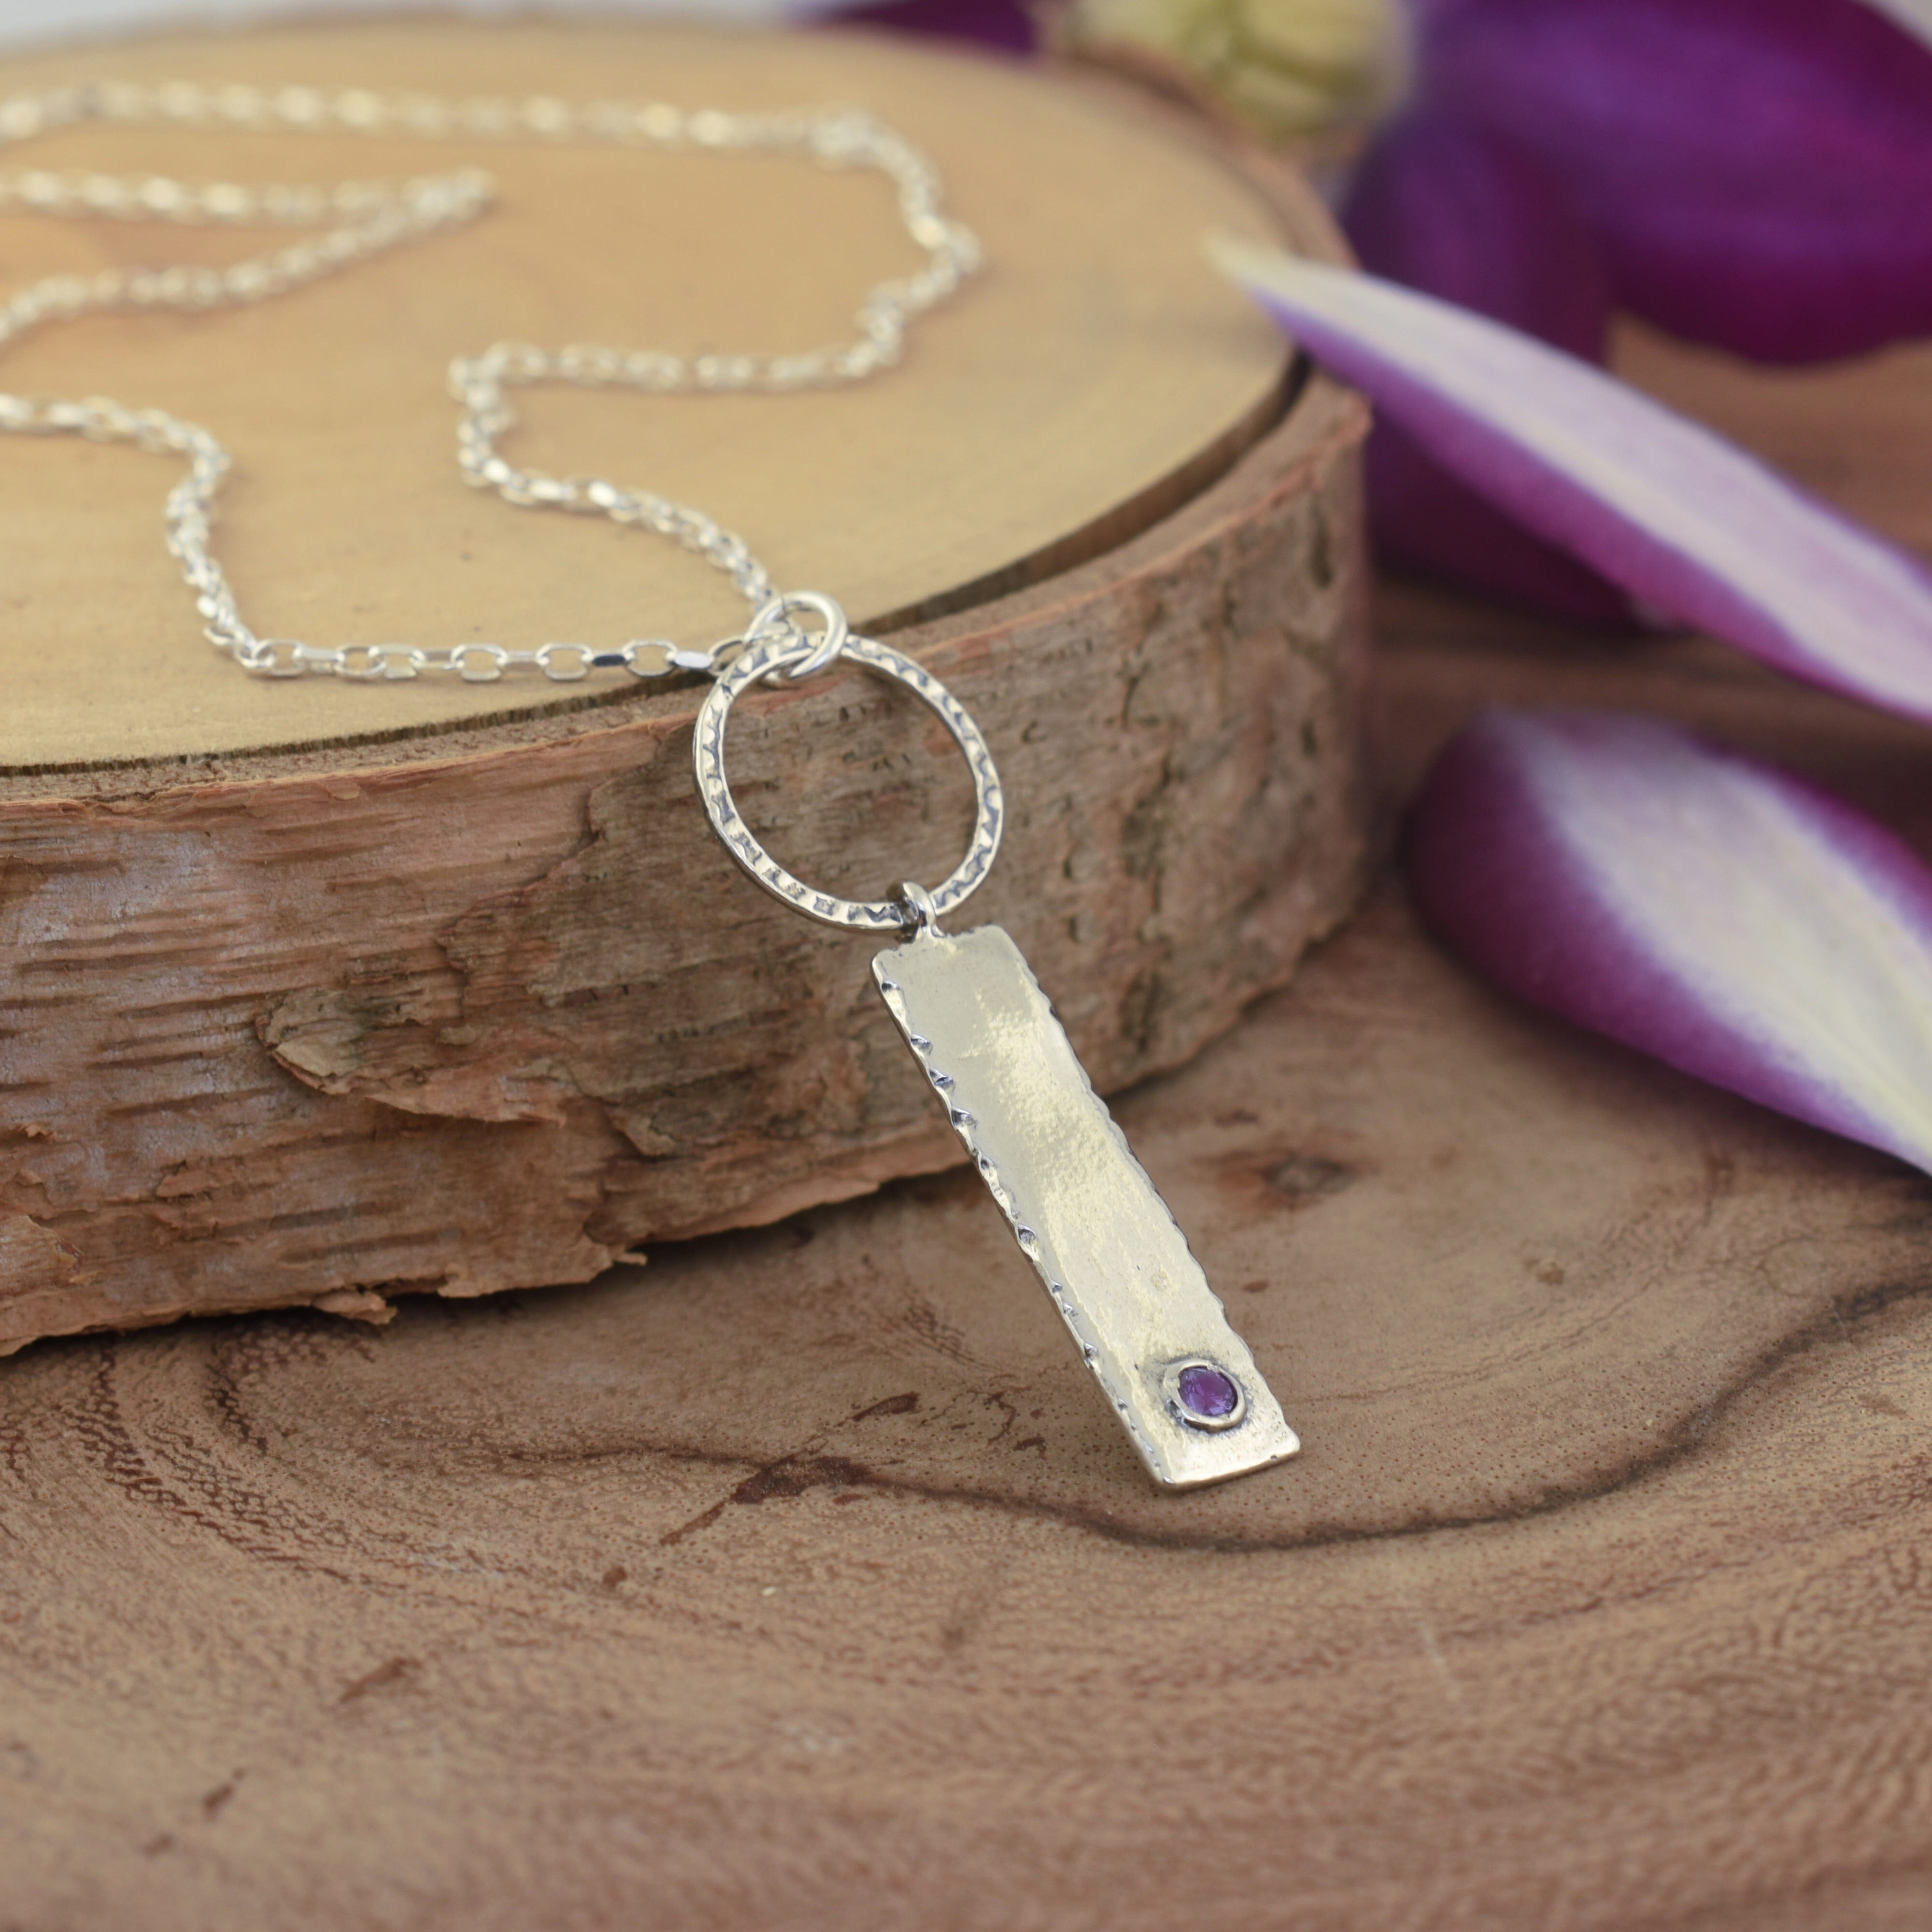 .925 sterling silver bar necklace with personalized birthstone option